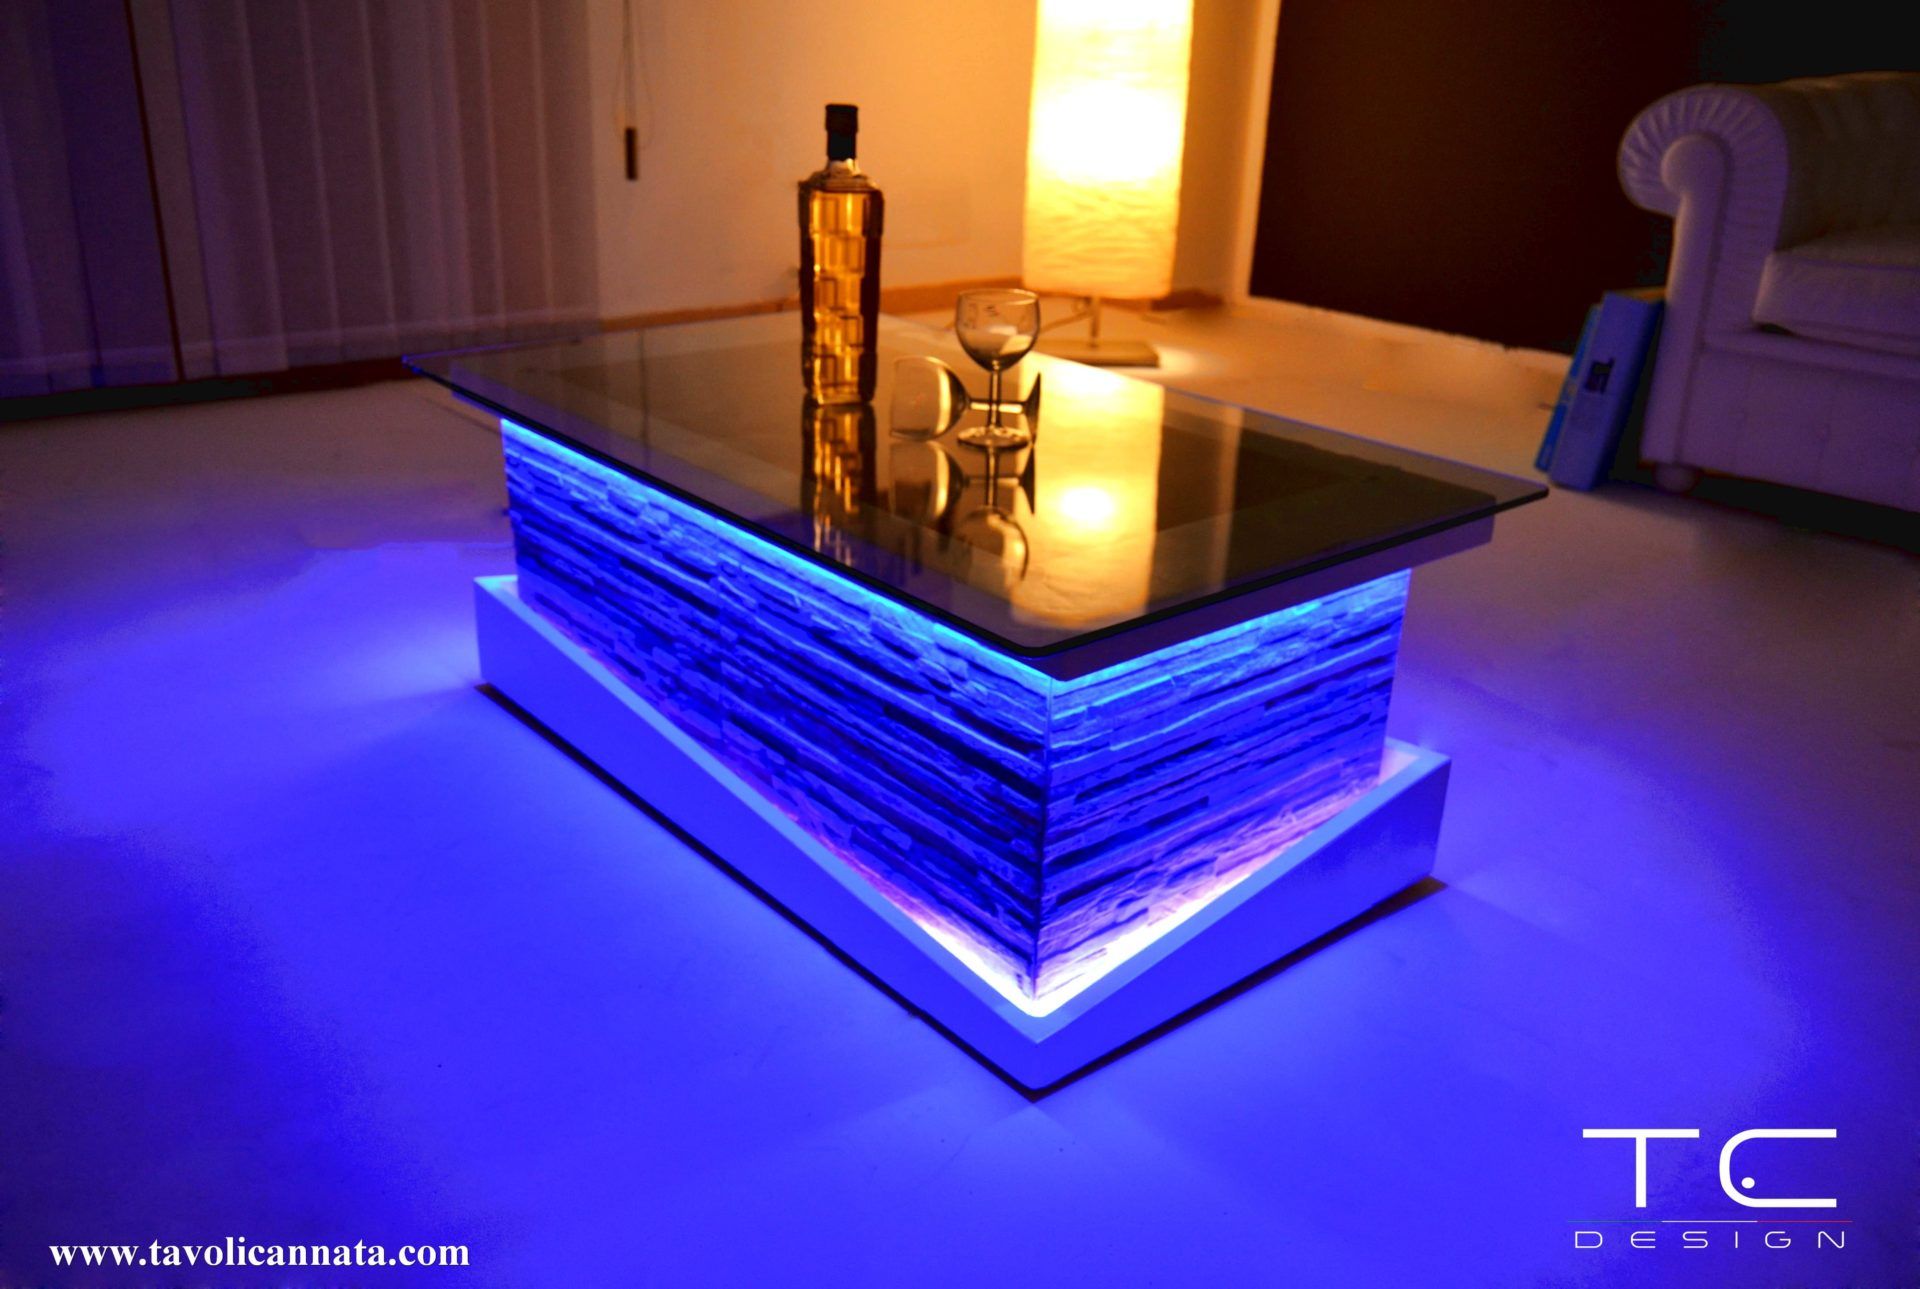 Glass Coffee Table With Led Light Rgb Color – Tavolini Cannata For Coffee Tables With Led Lights (View 3 of 15)